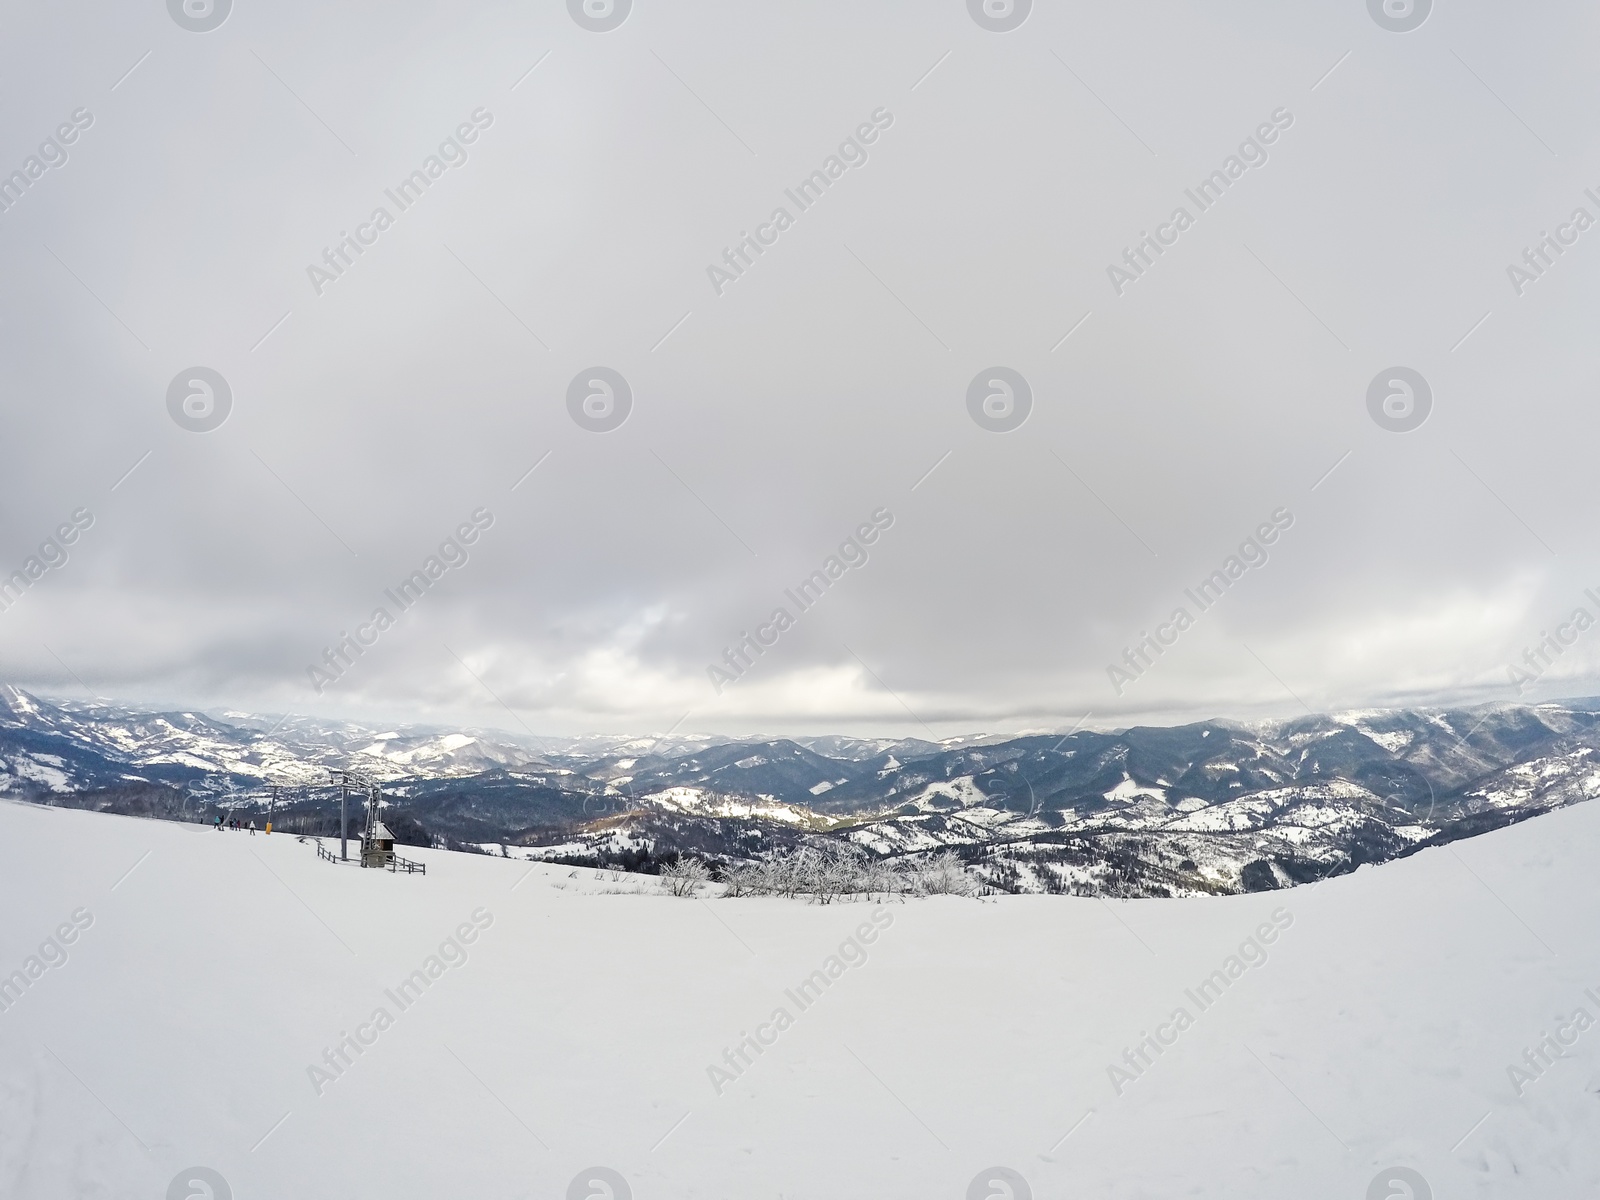 Photo of Picturesque view of snowy hill on cloudy winter day. Ski resort